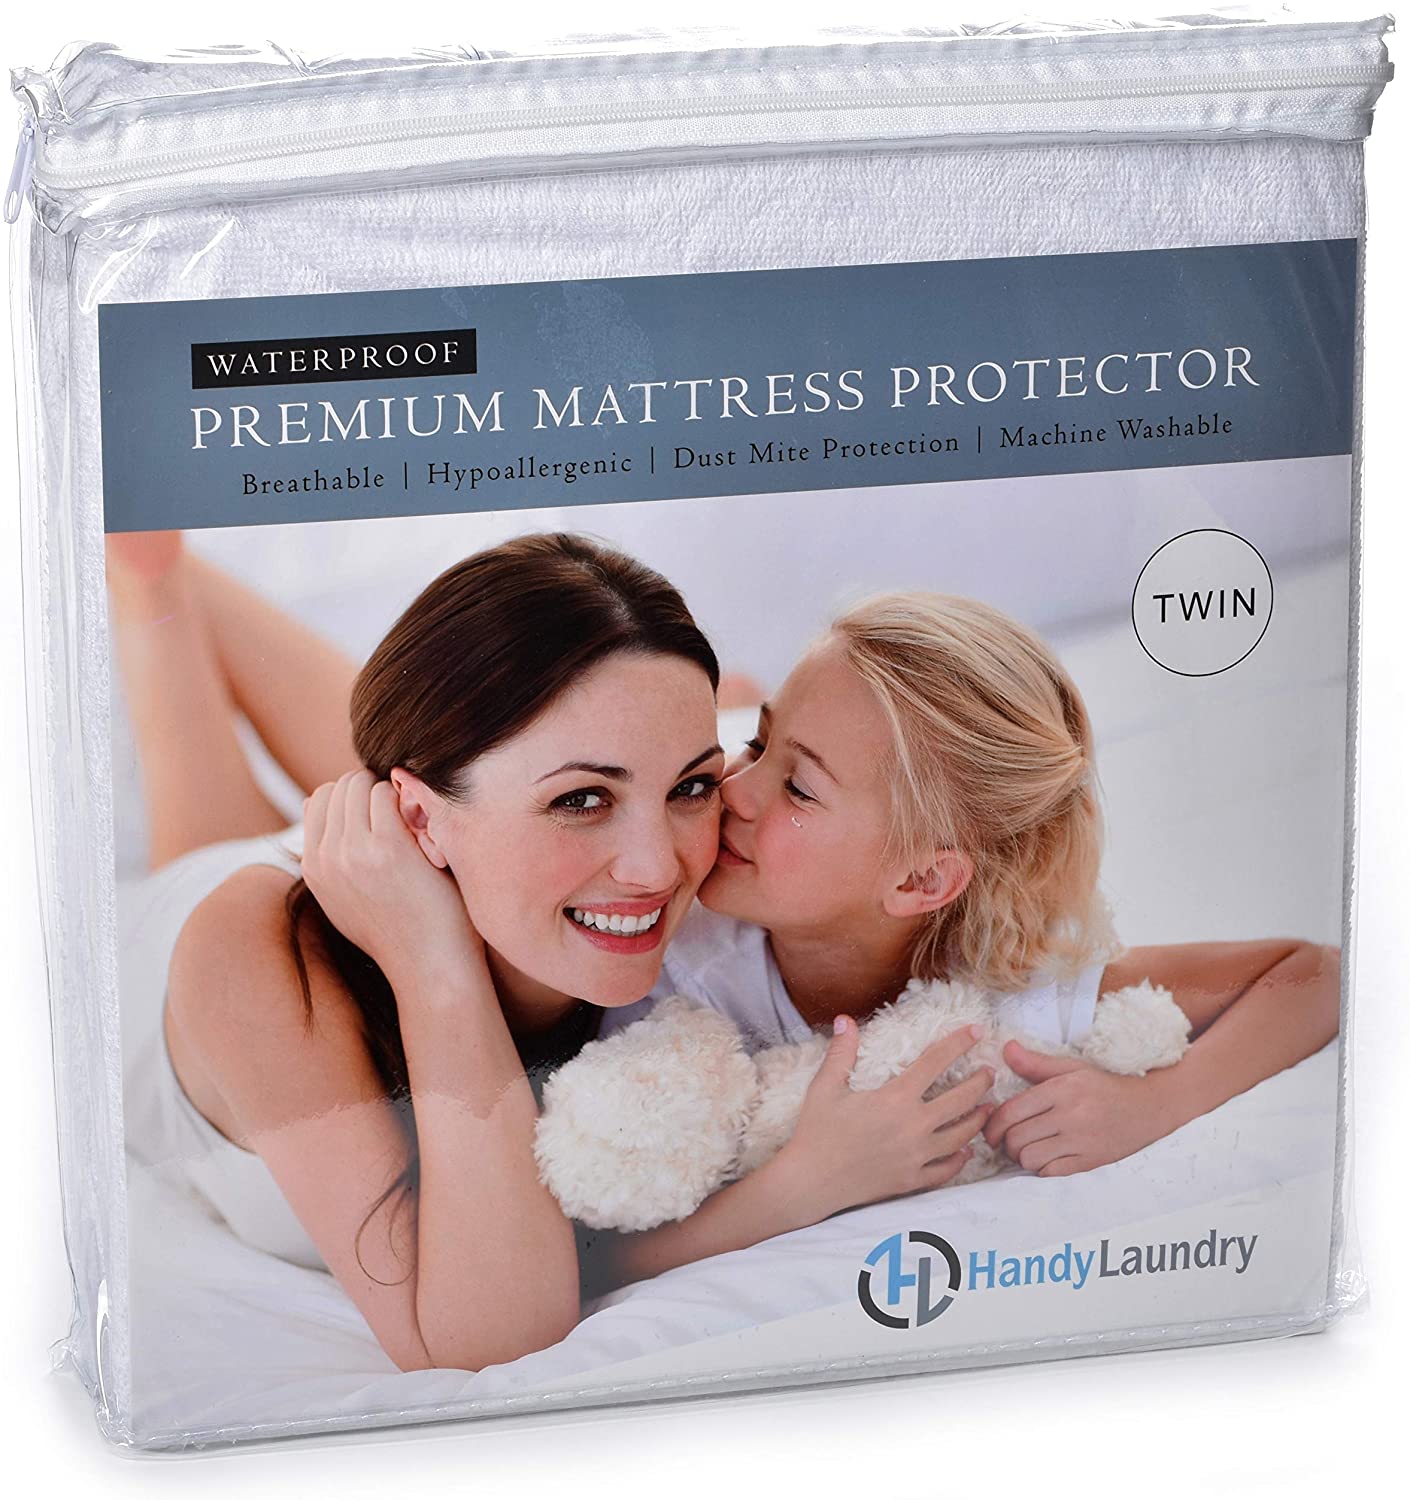 Handy Laundry Dust Mite Protection Twin Waterproof Mattress Protector